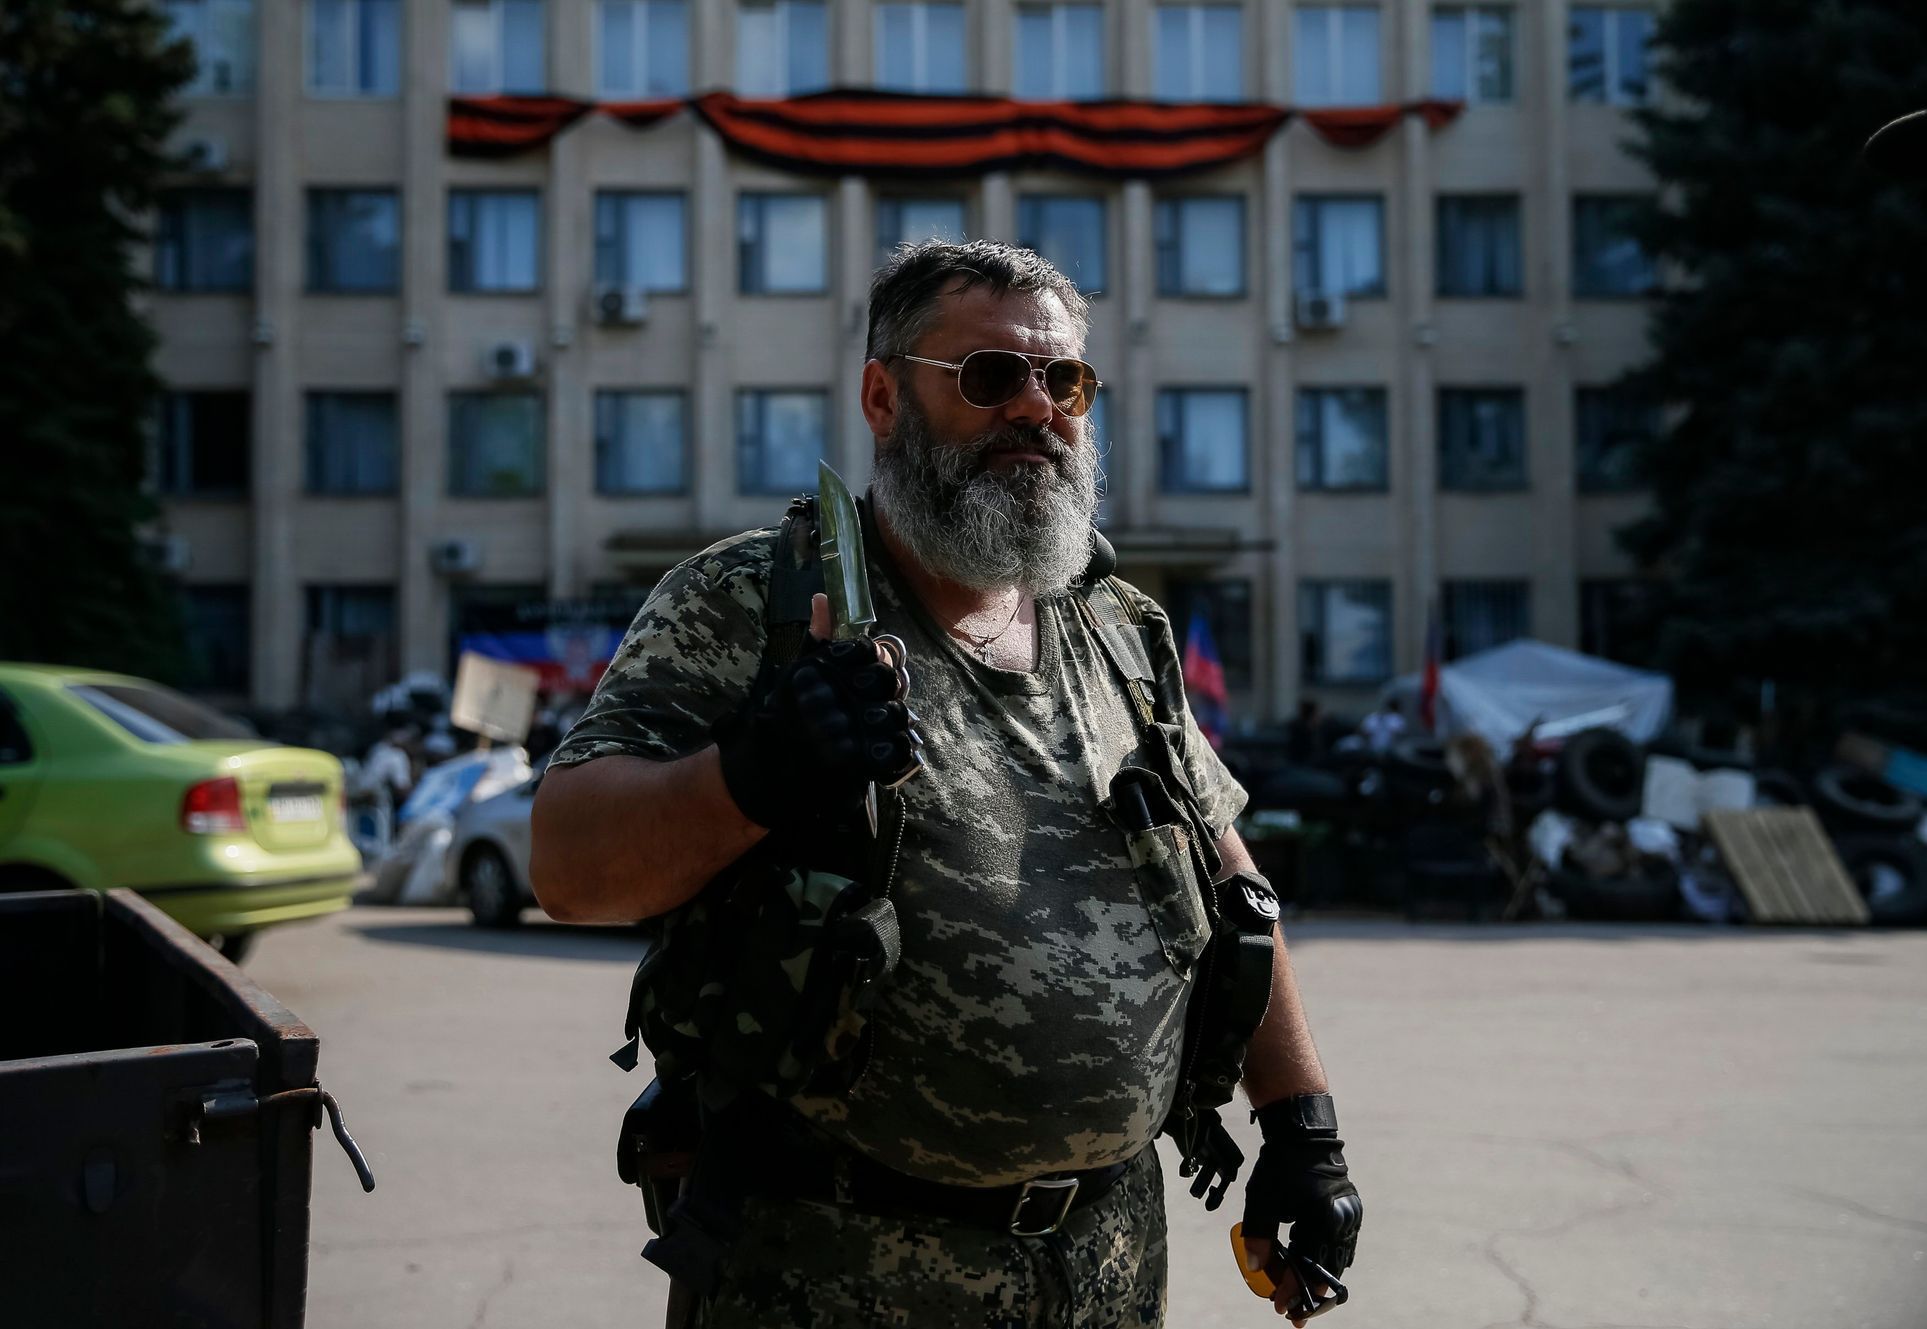 A pro-Russian rebel holds a knife as he stands near a local government building in downtown Kramatorsk